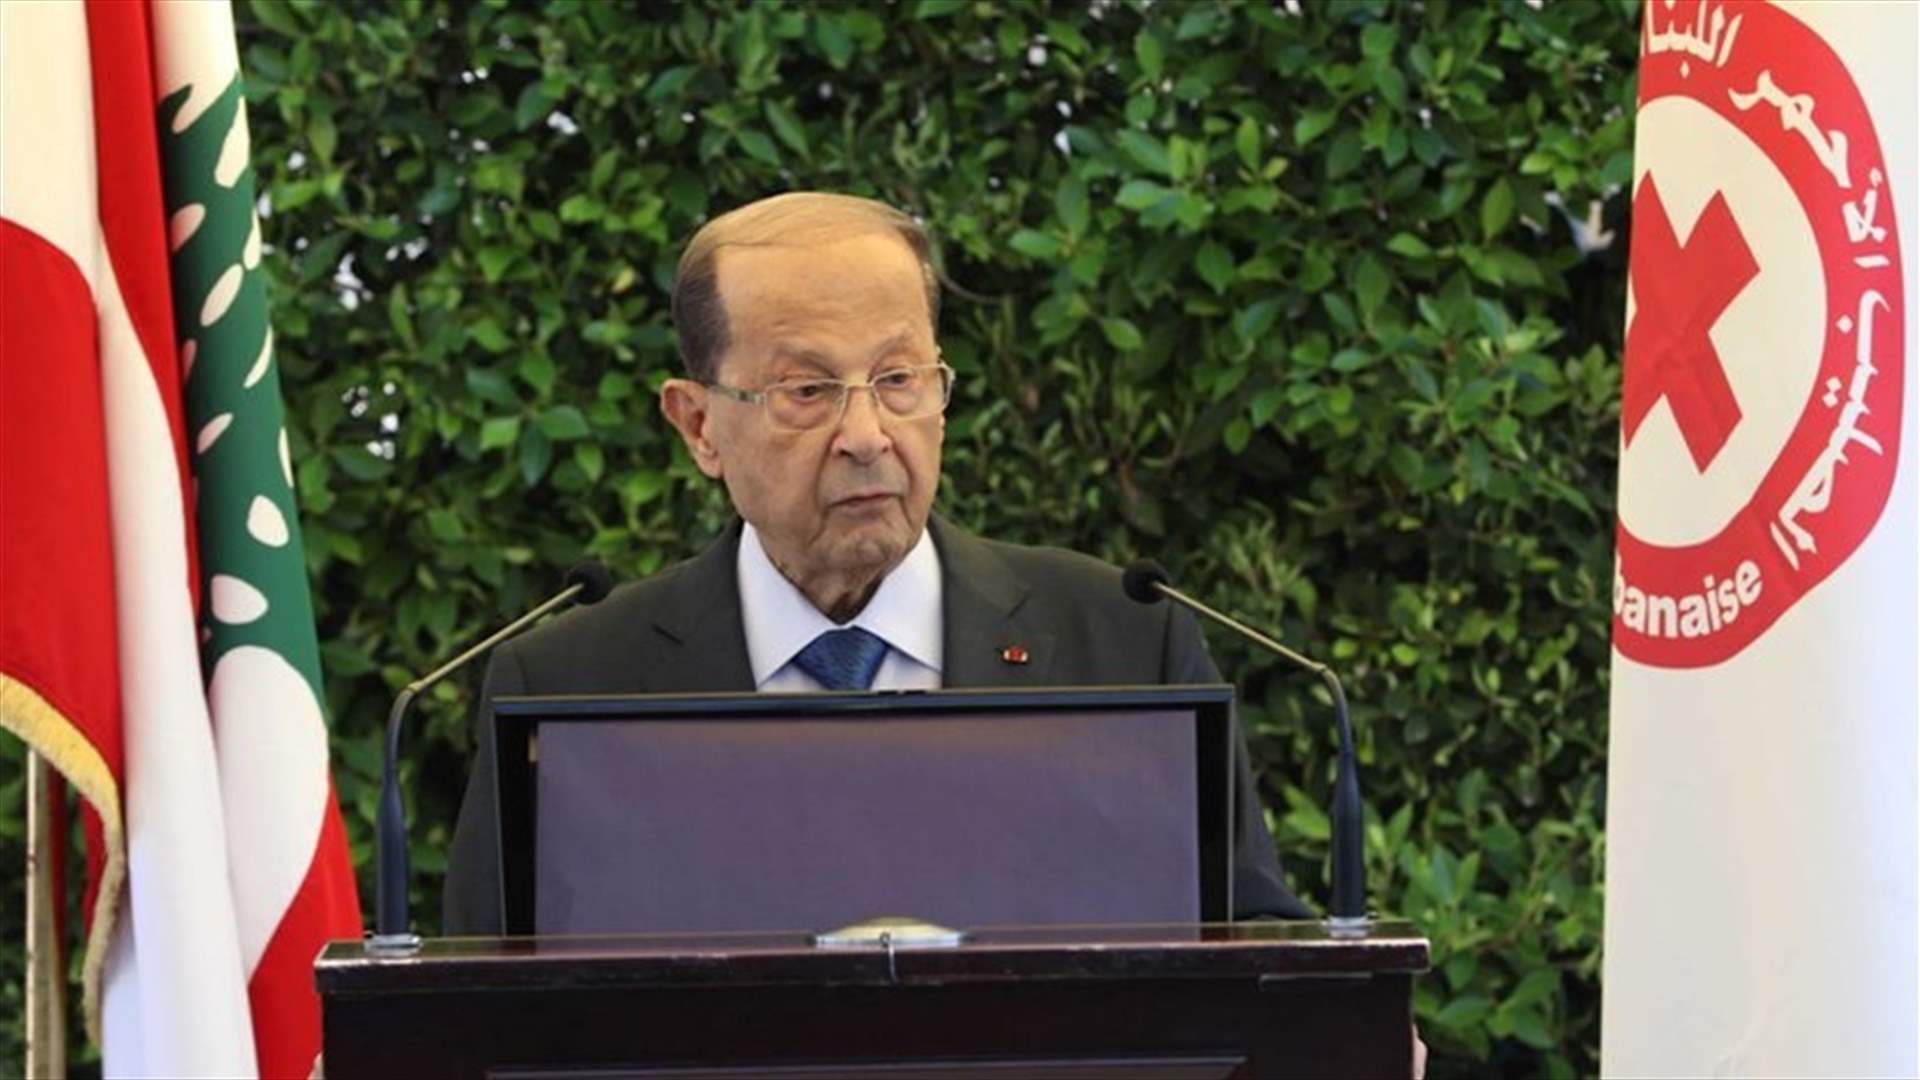 Aoun: One of the most basic rights of Red Cross paramedics is to recognize their sacrifices